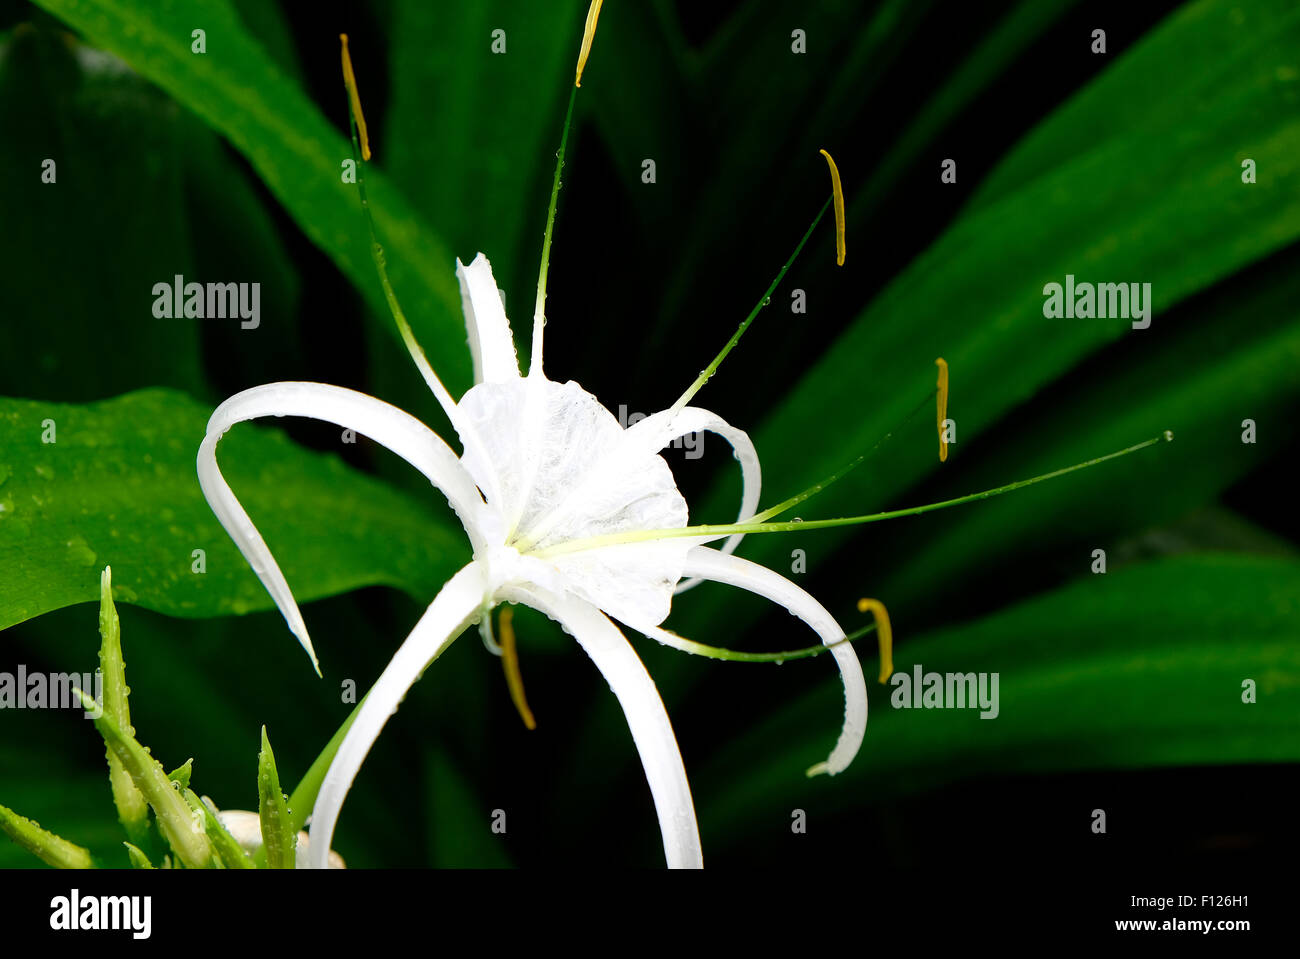 White spider lily flower growing in garden Banque D'Images